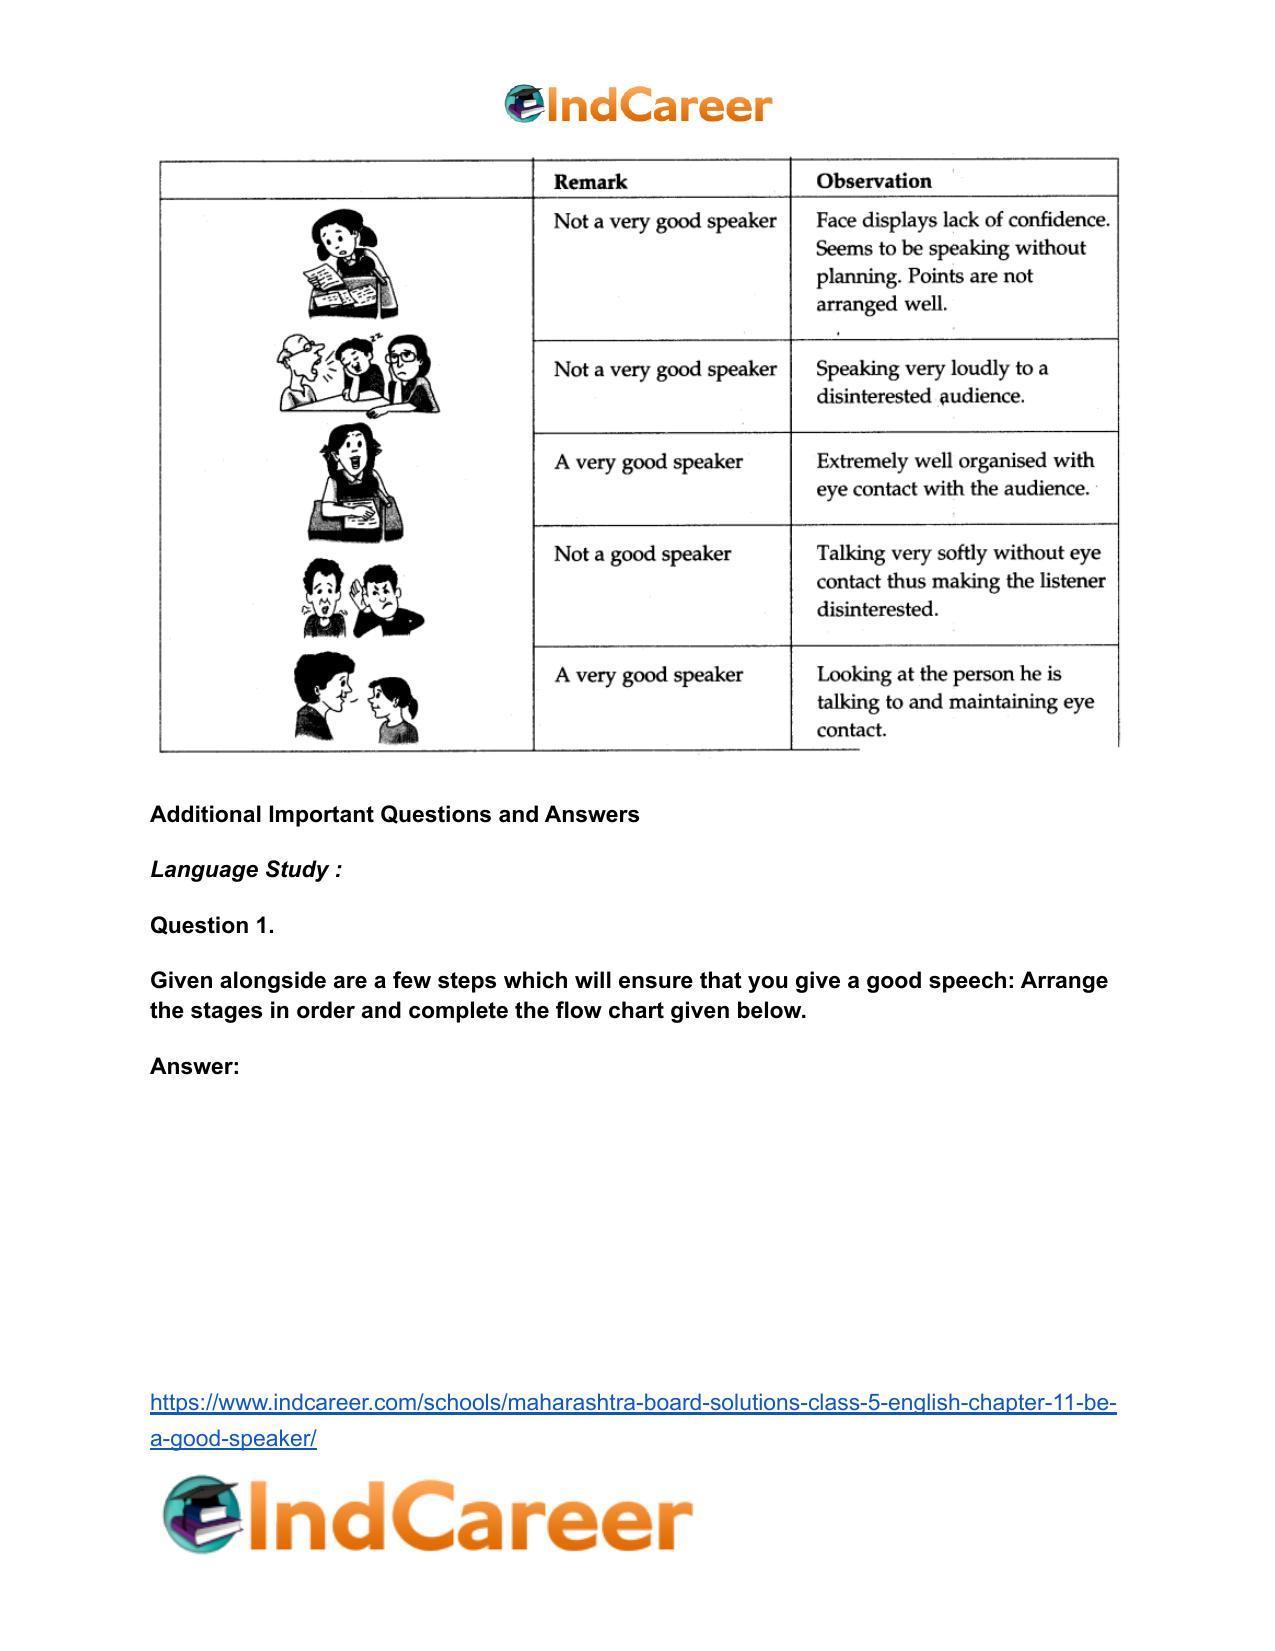 Maharashtra Board Solutions Class 5-English: Chapter 11- Be a Good Speaker - Page 5